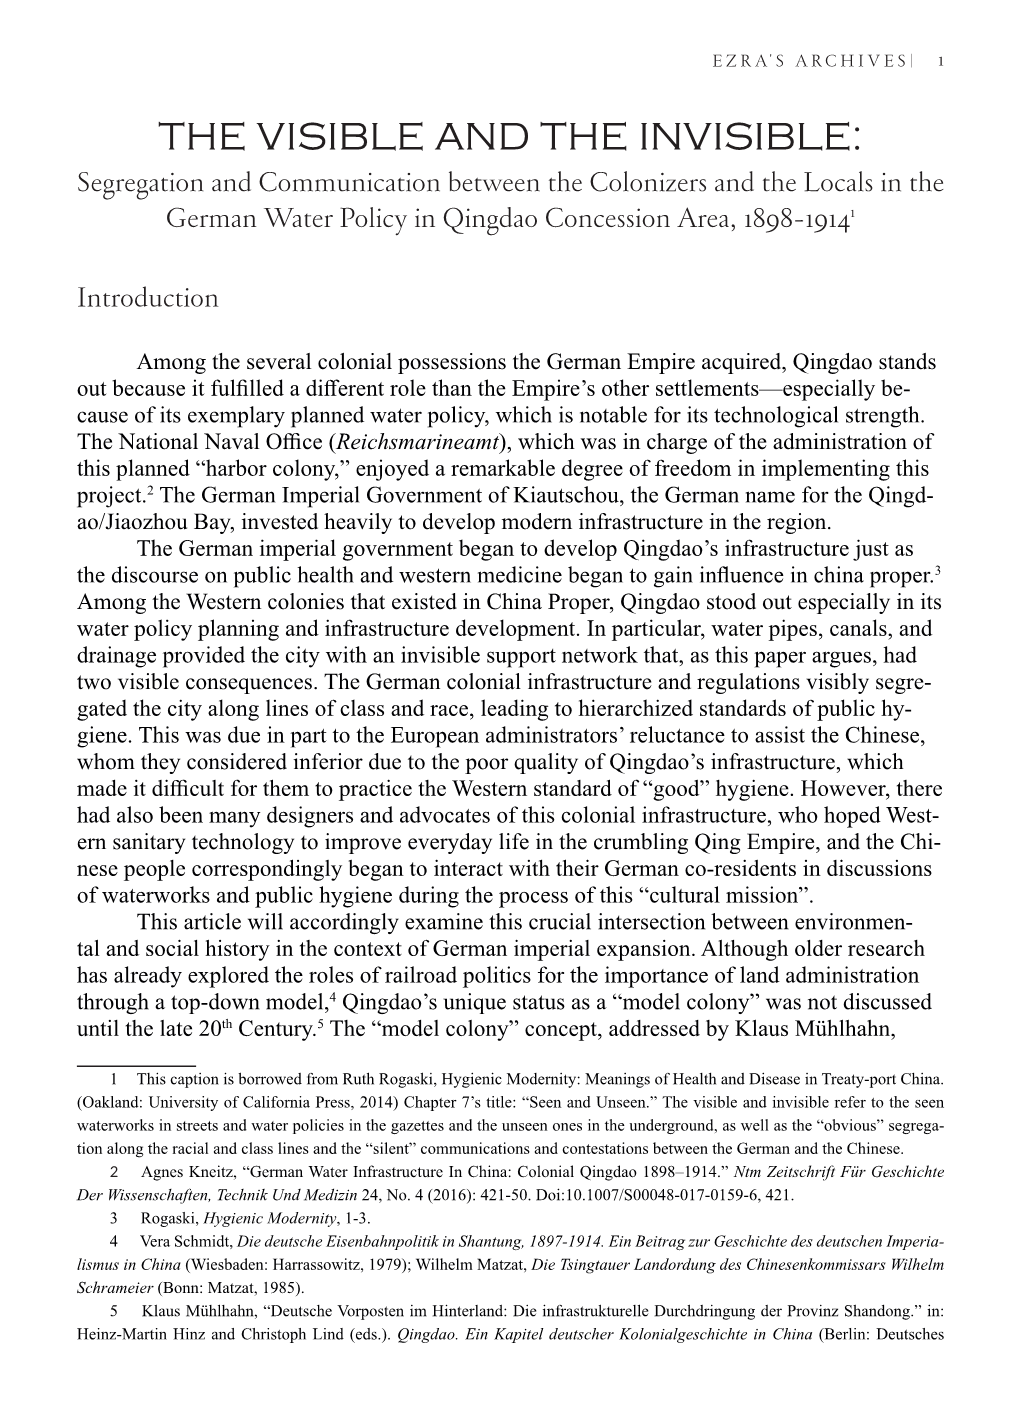 THE VISIBLE and the INVISIBLE: Segregation and Communication Between the Colonizers and the Locals in the German Water Policy in Qingdao Concession Area, 1898-19141